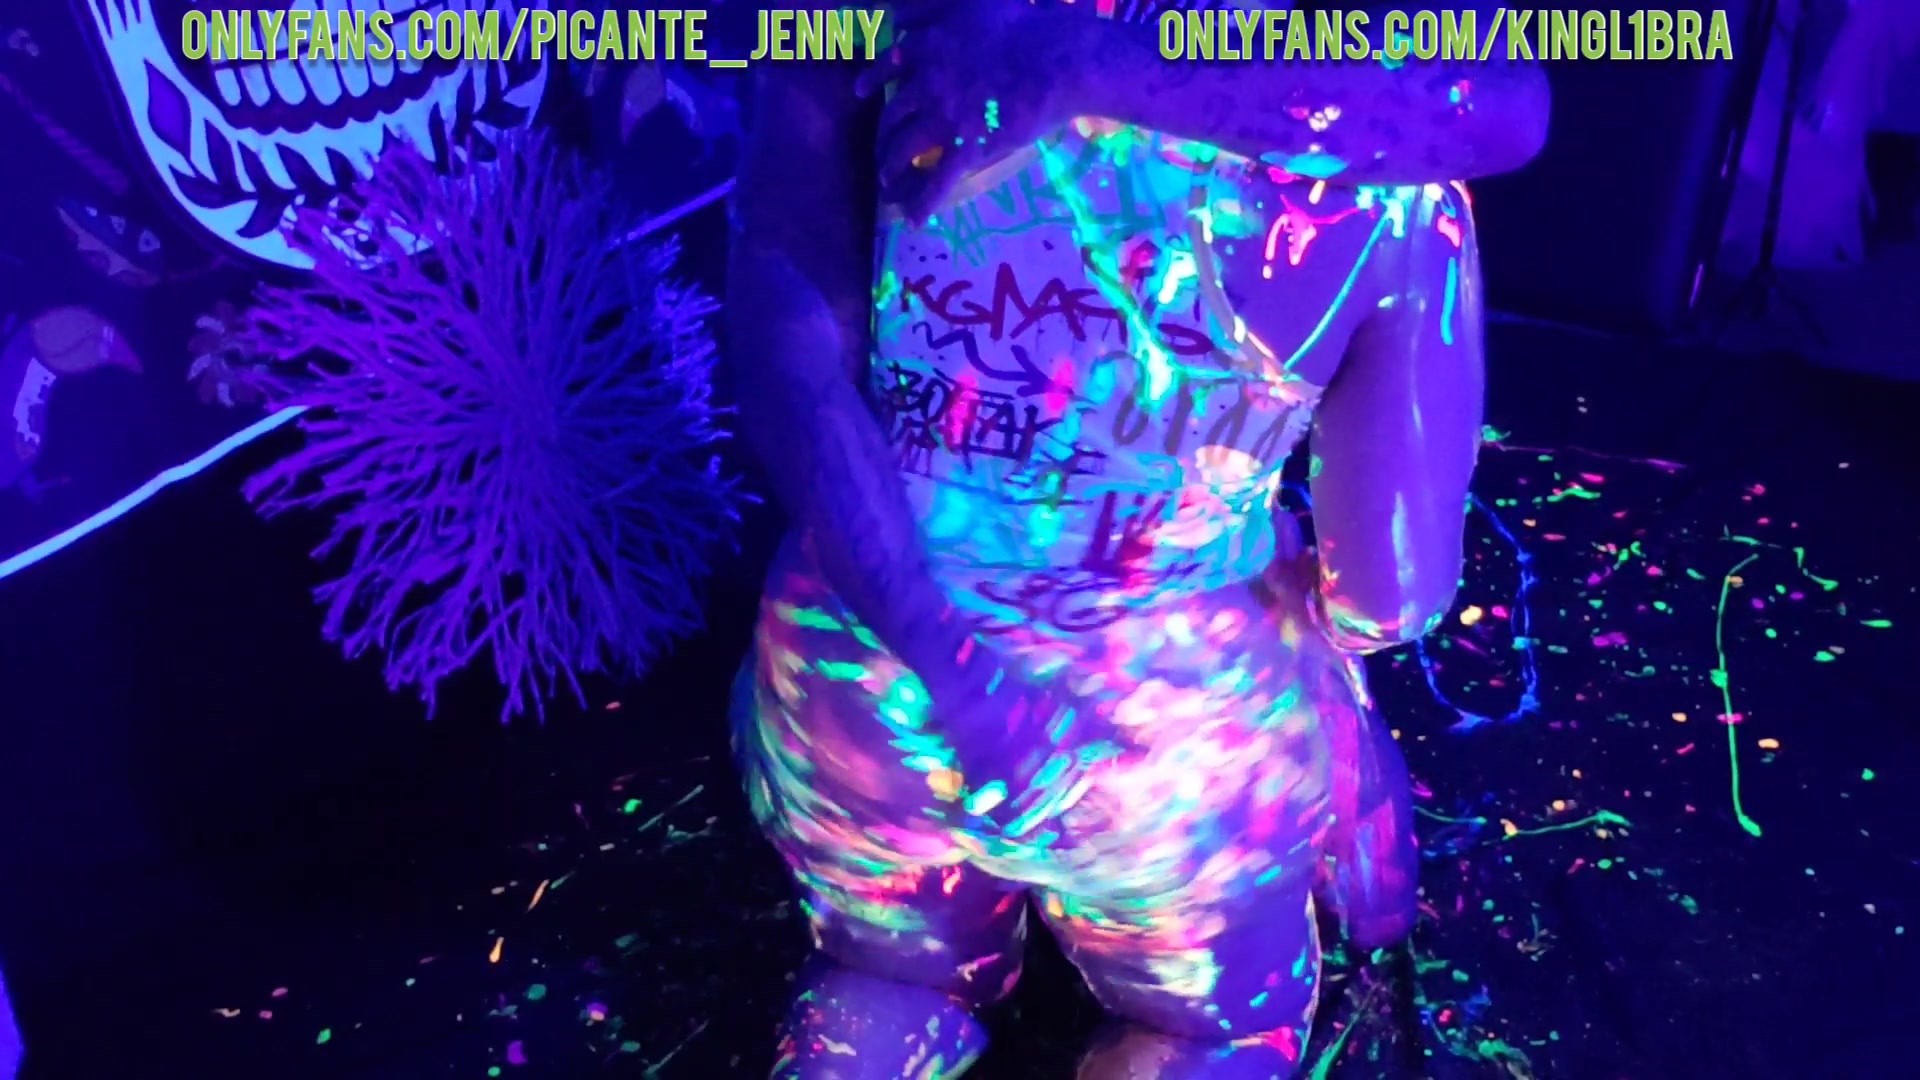 Picante_Jenny – BODY PAINT GLOW IN THE DARK SEX